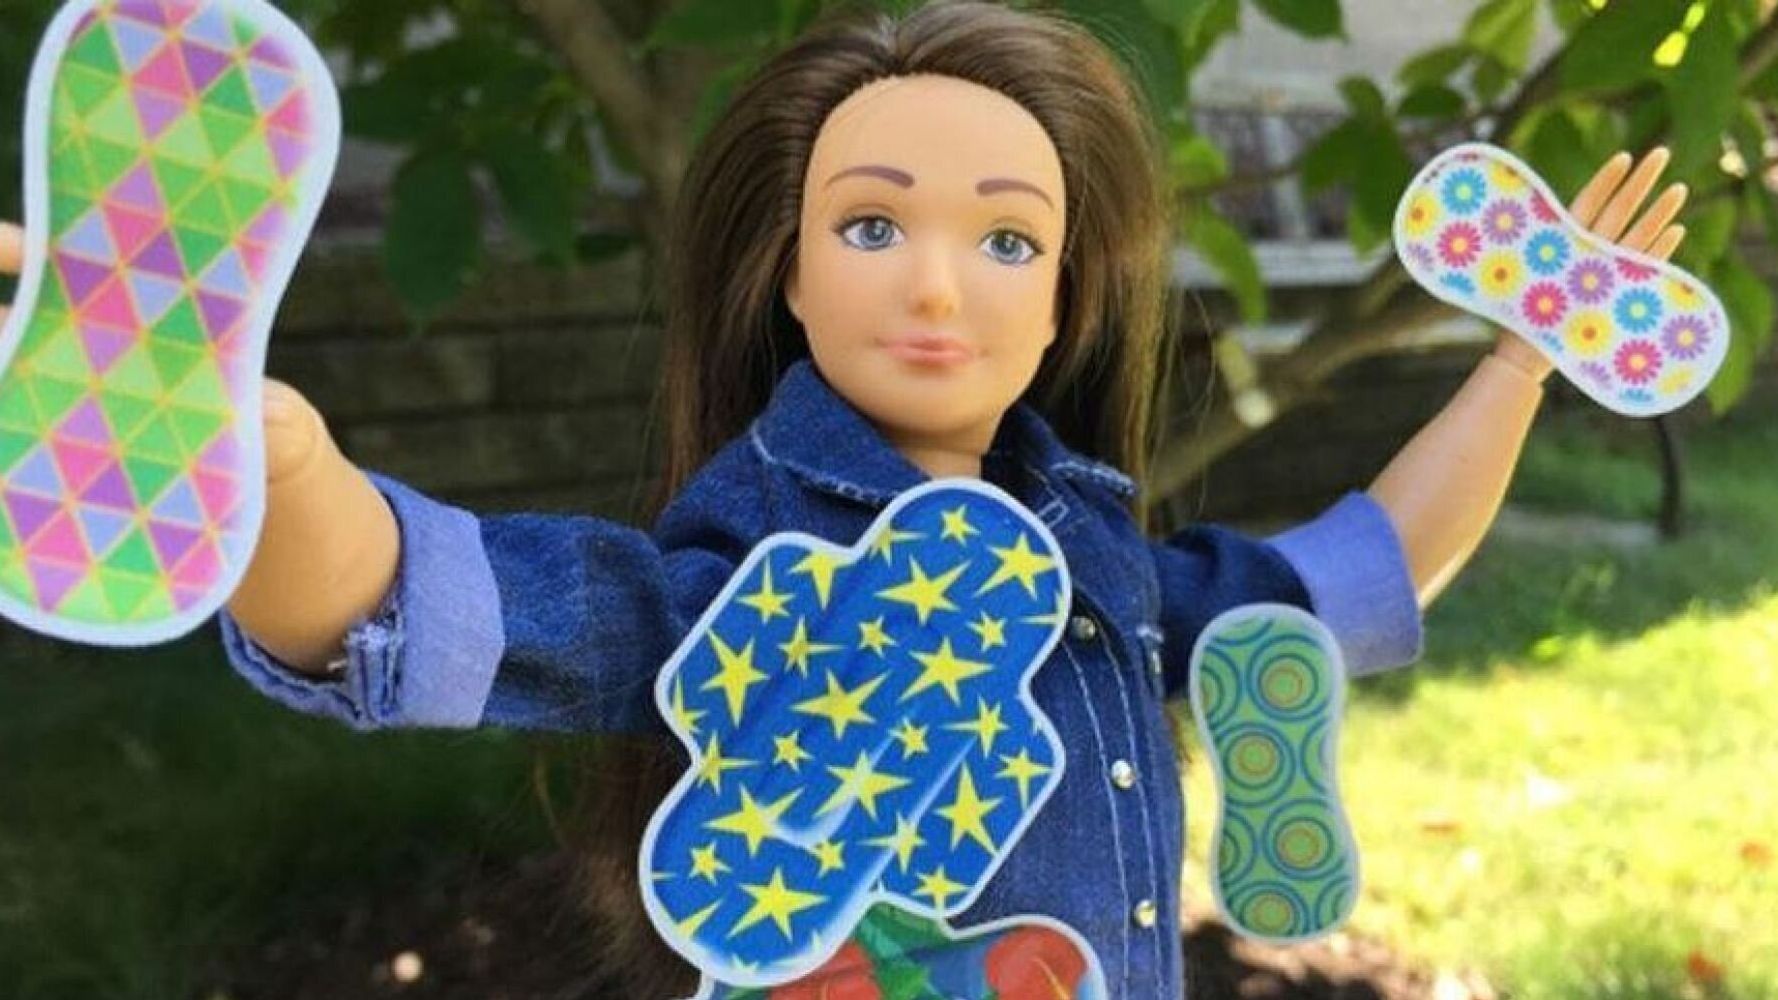 Lammily Toy Doll Comes With Sanitary Pads In Bid To Break